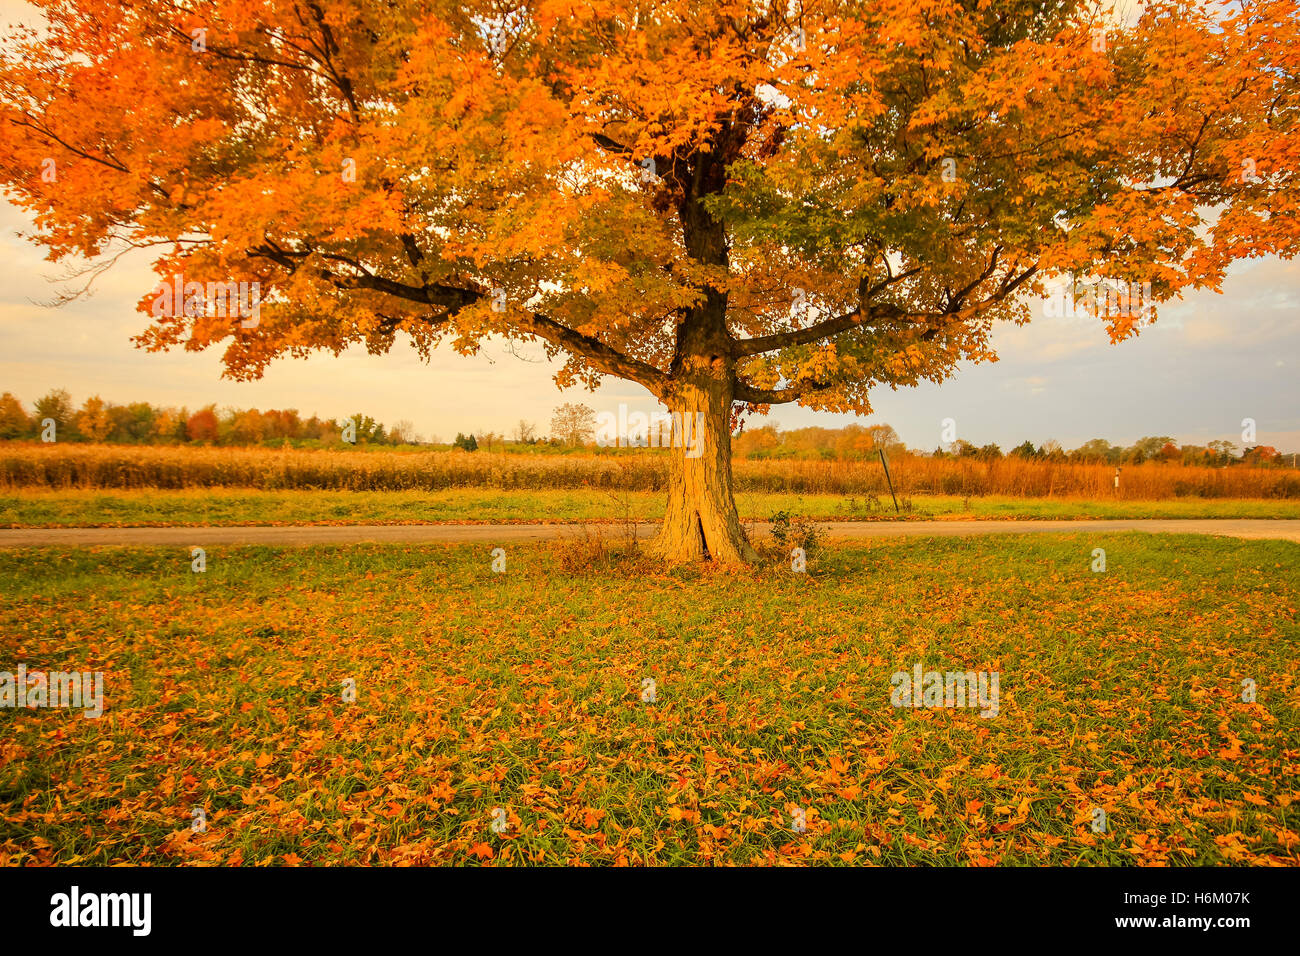 Single tree in autumn with leaves fallen on the ground Stock Photo